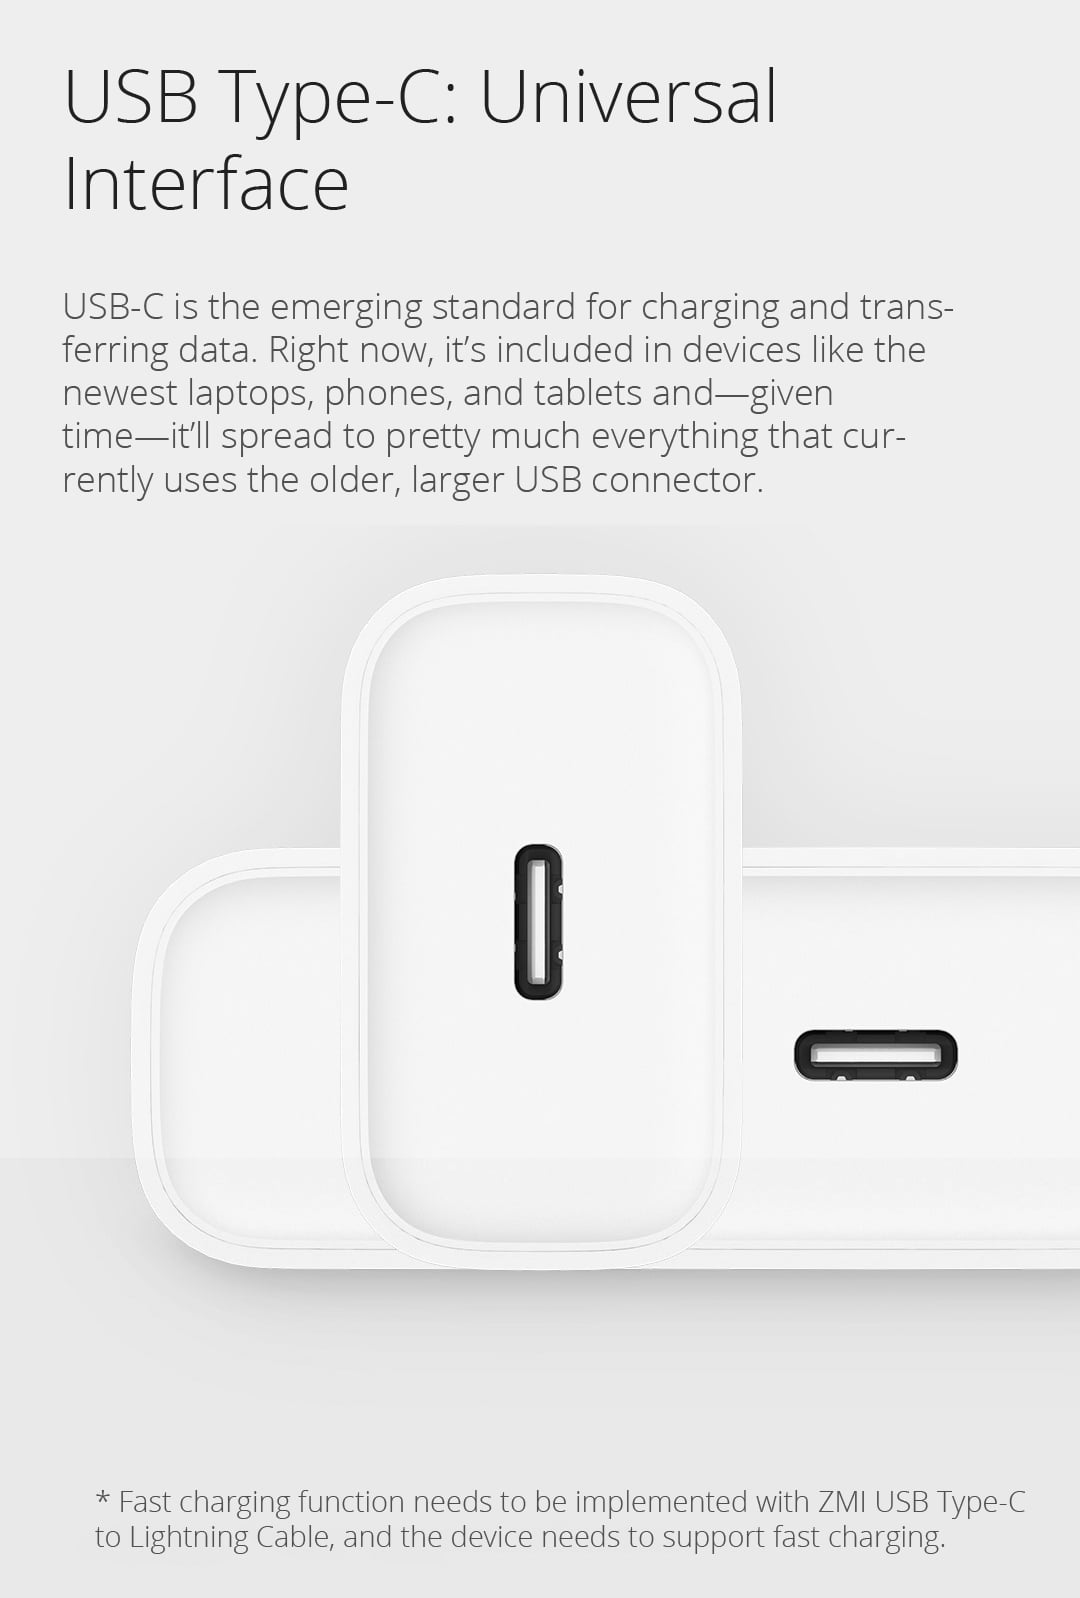 USB Type-C: Universal Interface. USB-C is the emerging standard for charging and transferring data. Right now, it’s included in devices like the newest laptops, phones, and tablets and—given time—it’ll spread to pretty much everything that currently uses the older, larger USB connector.